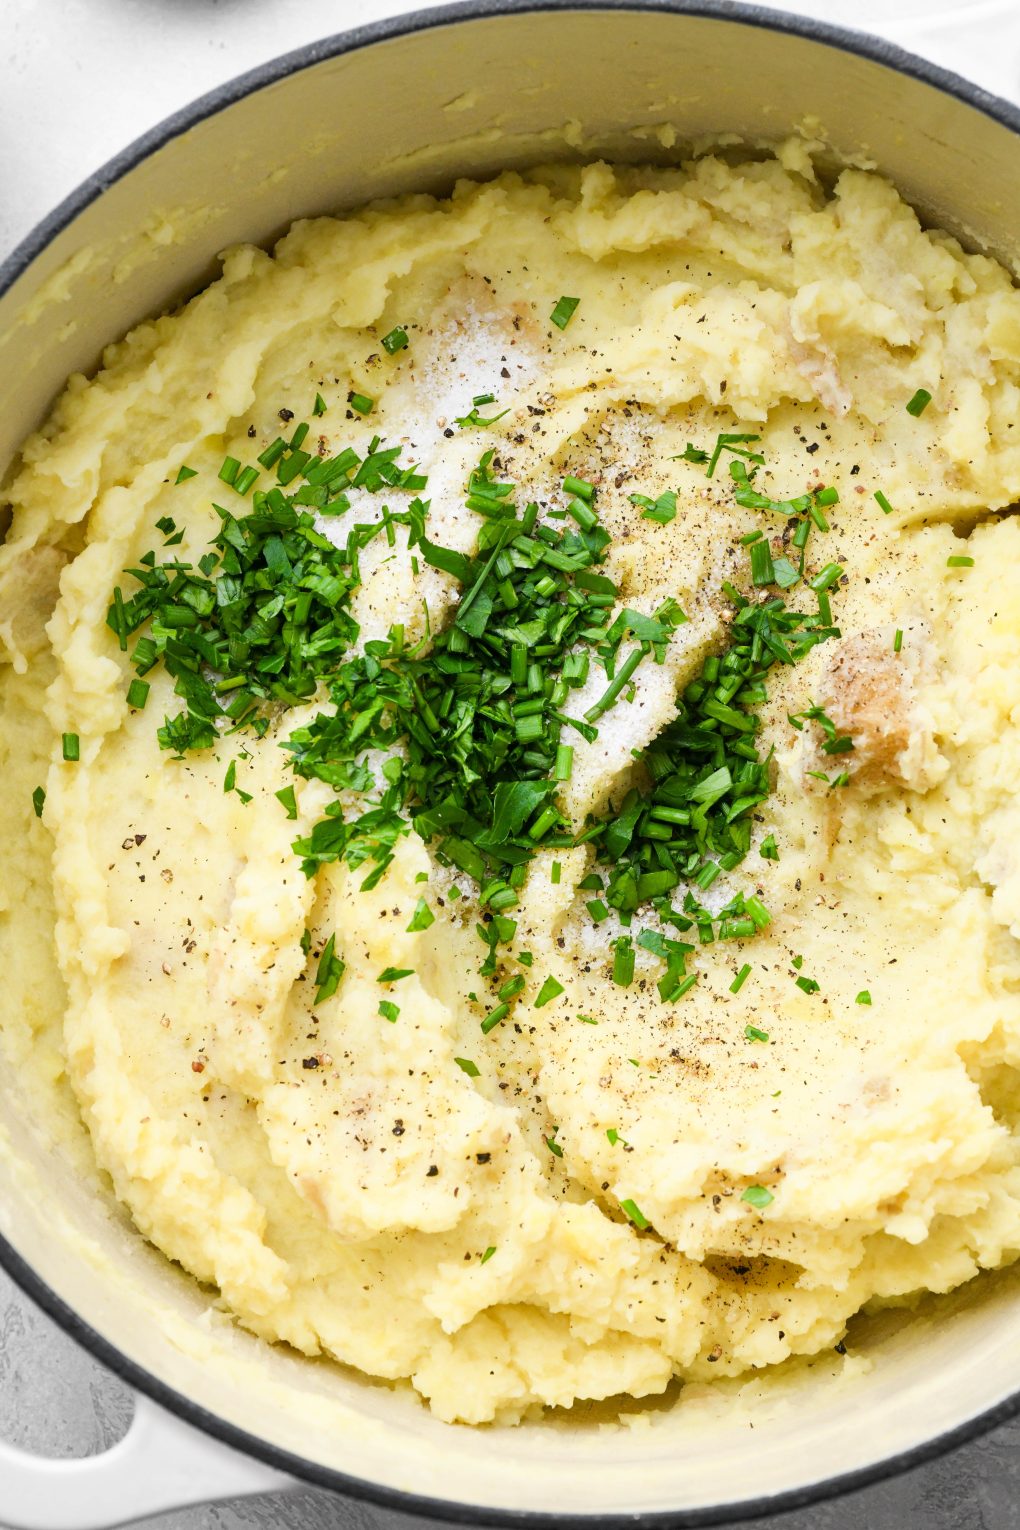 Photos showing how to make Whole30 mashed potatoes - Mashed potatoes in large pot topped with fresh herbs, salt, and pepper.